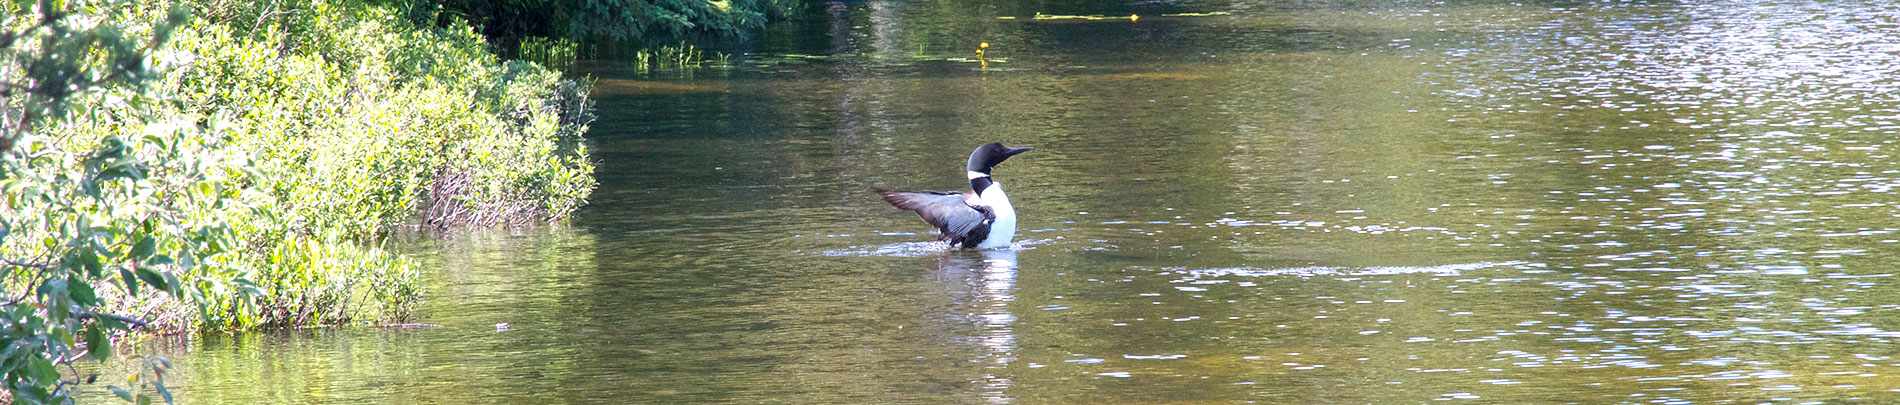 A loon flaps its wings and lifts itself up out of the water.